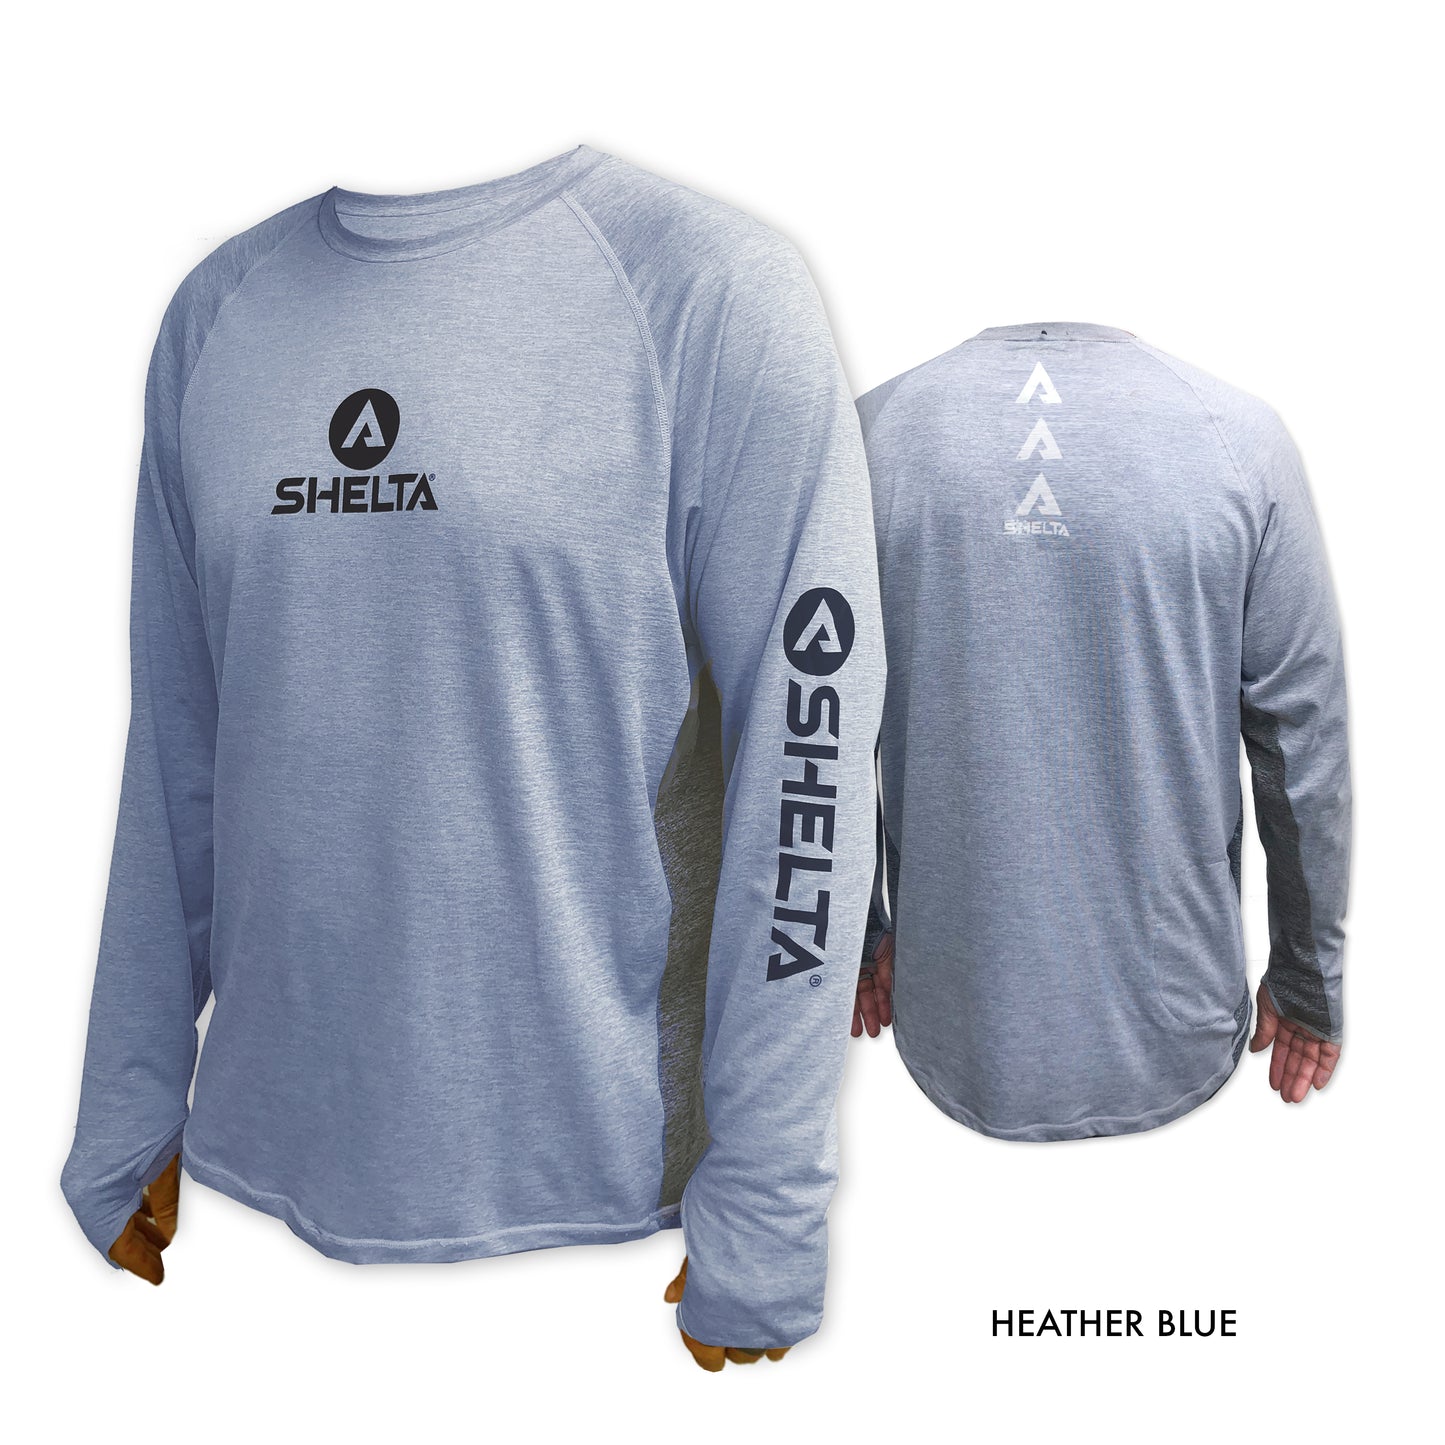 The Aquaterra Crew neck in Heather Blue is engineered & built with sun protection, function, and durability in mind.  Truly amphibious these technical tops work as well in the water as on land.  Offering features consistent with Shelta core values and innovation goals.   UPF 50+ UV protection, the highest rating given.  Blocks 98% of UVA/UVB radiation.